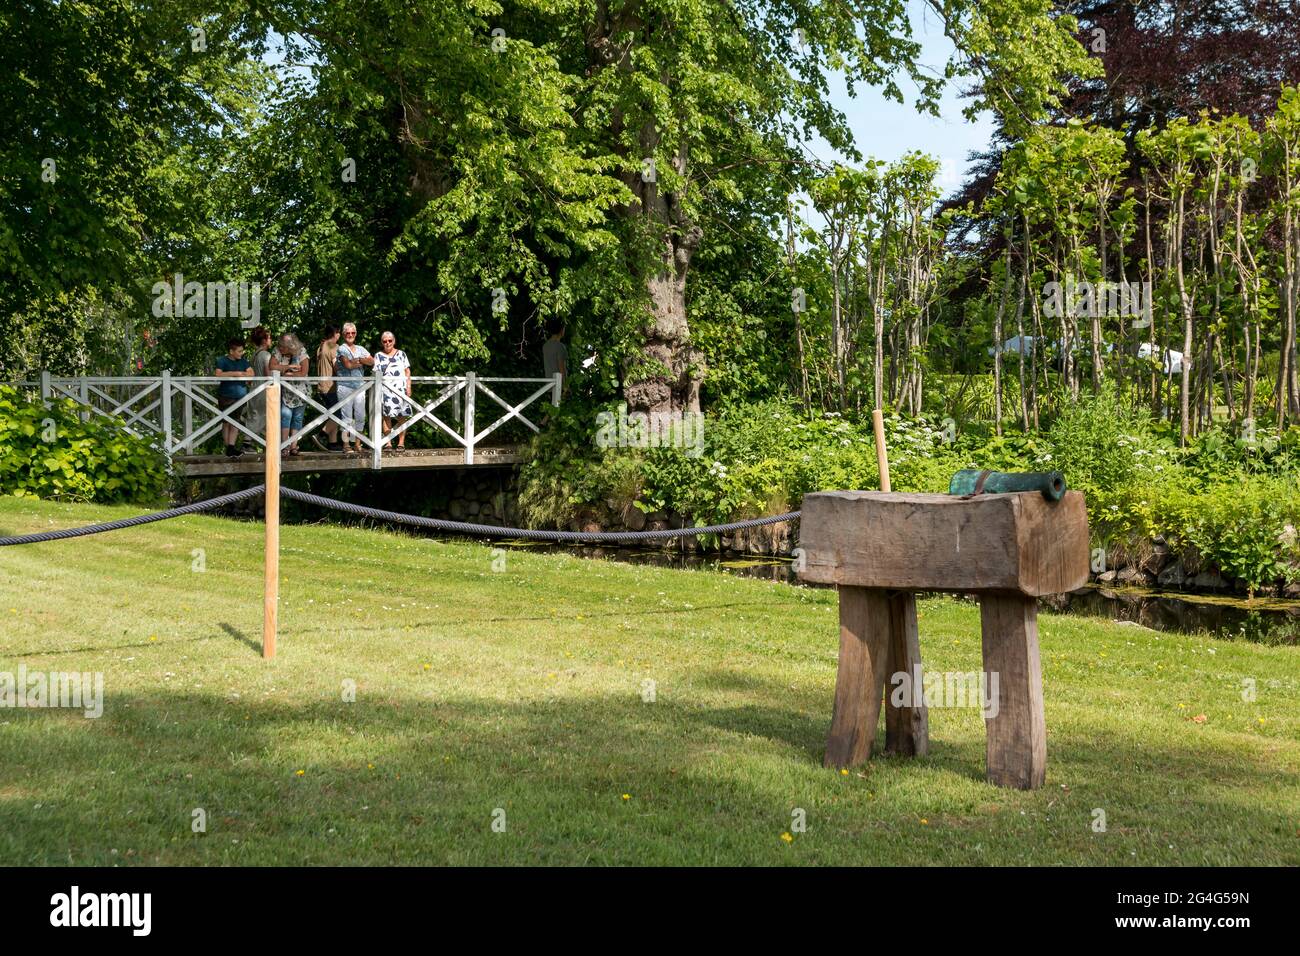 Auning, denmark - 19 June 2021: 18th century day at Gammel Estrup Castle, Old cannon to make signal blasts with, tree and metal, bronce cannon Stock Photo